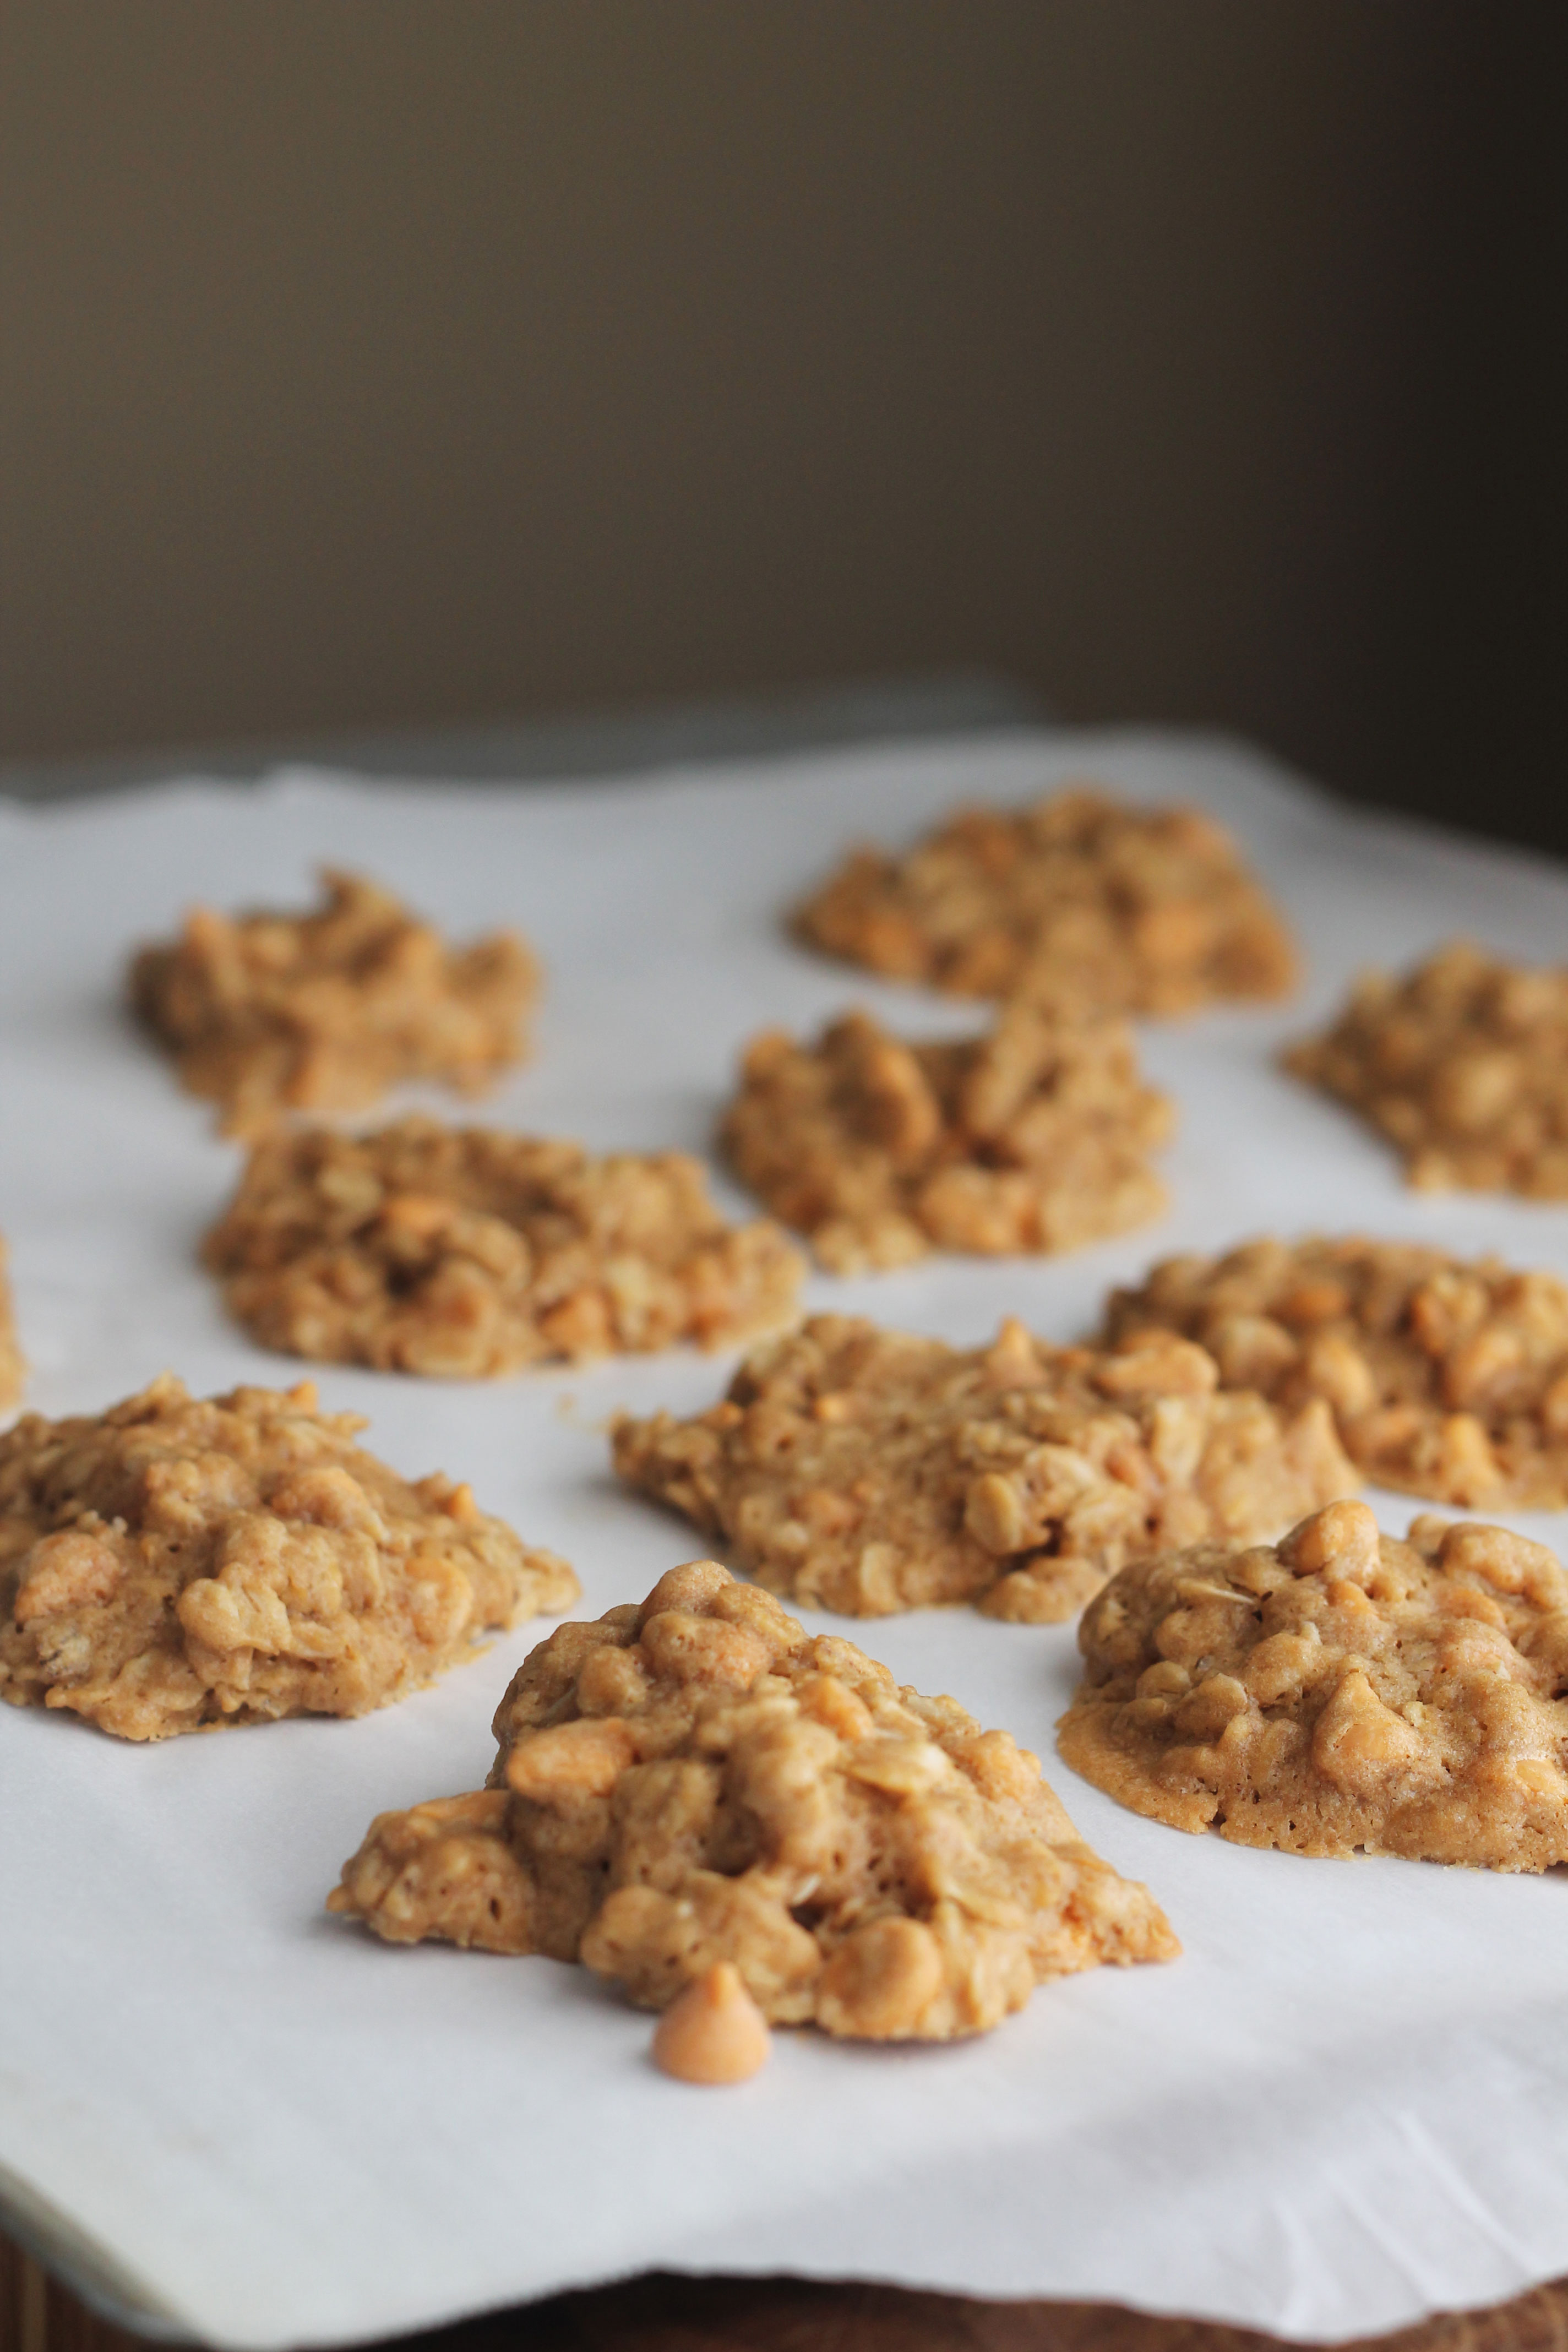 These are the best Butterscotch Oatmeal Cookies